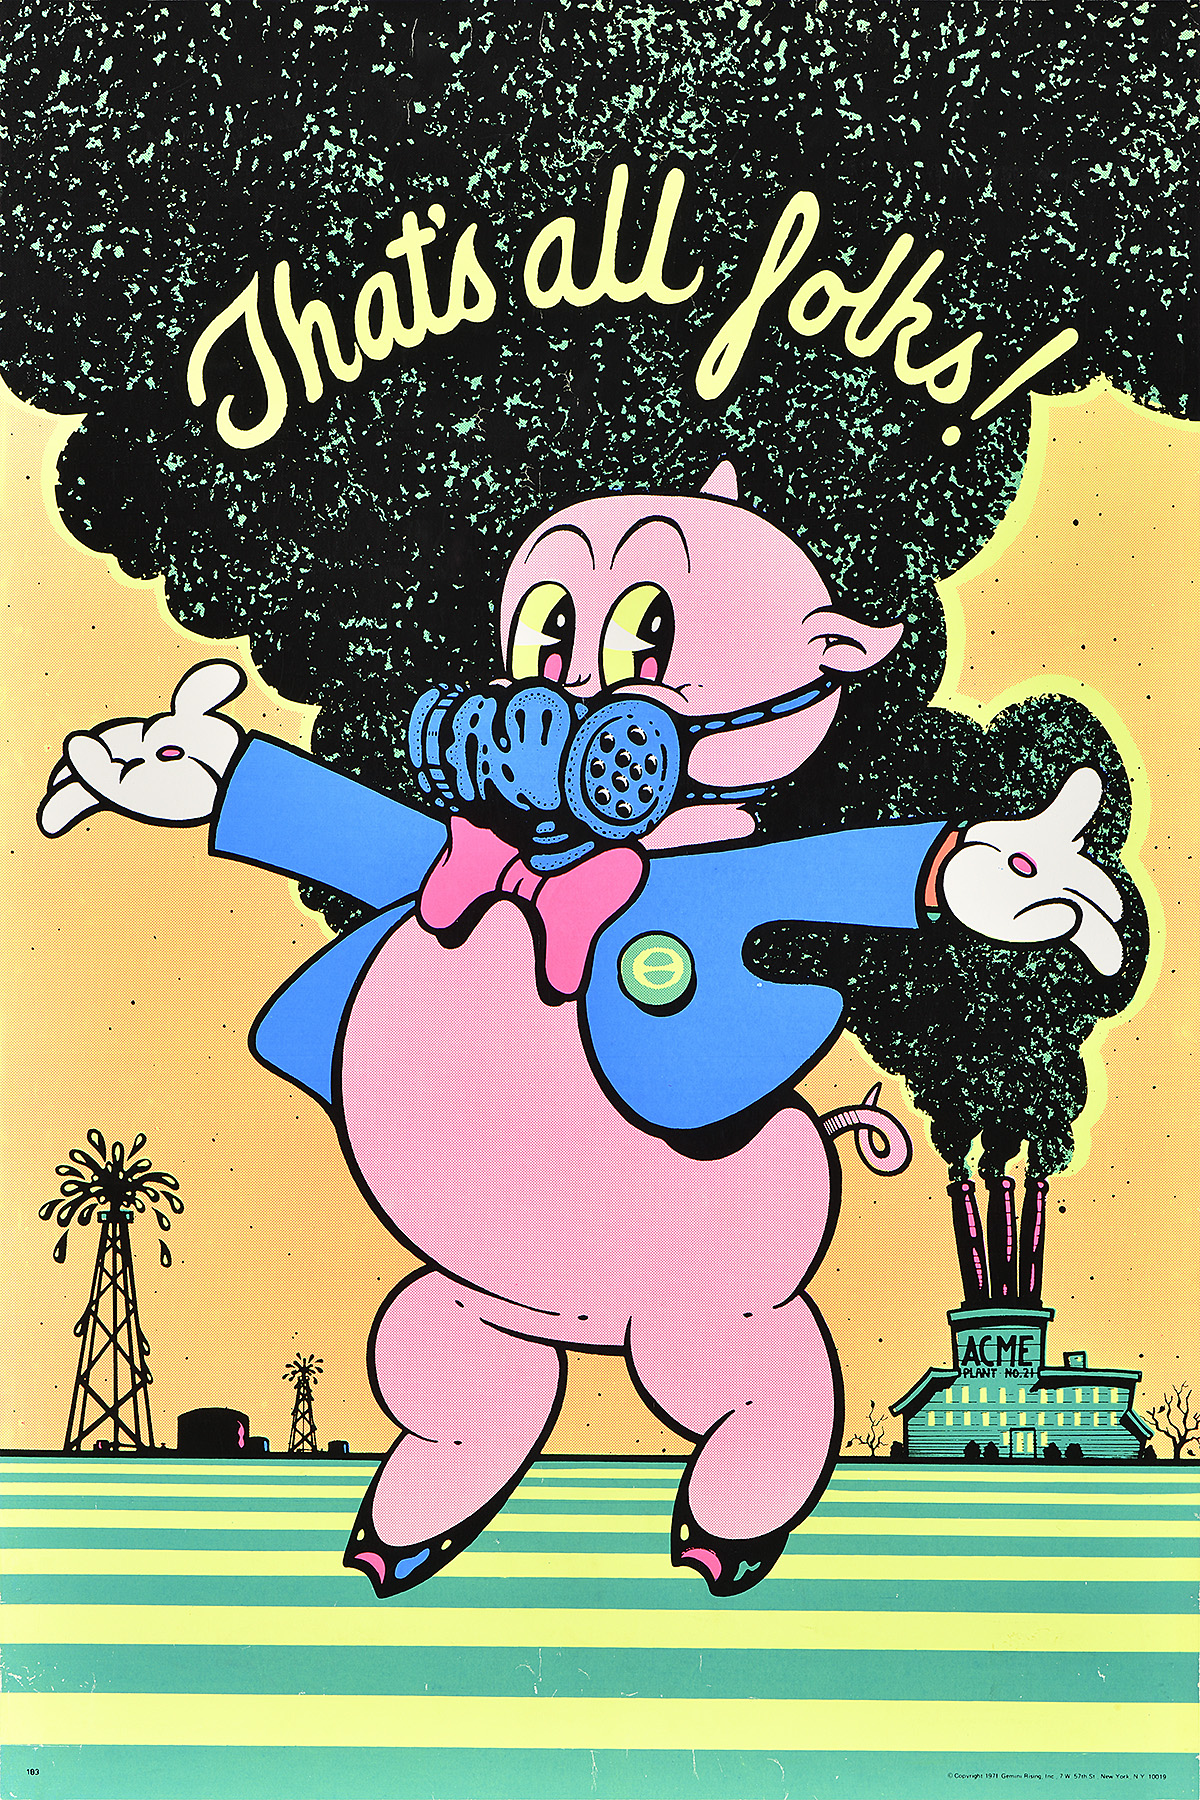 A poster of porky pig wearing a gas mask with cursive text stating 